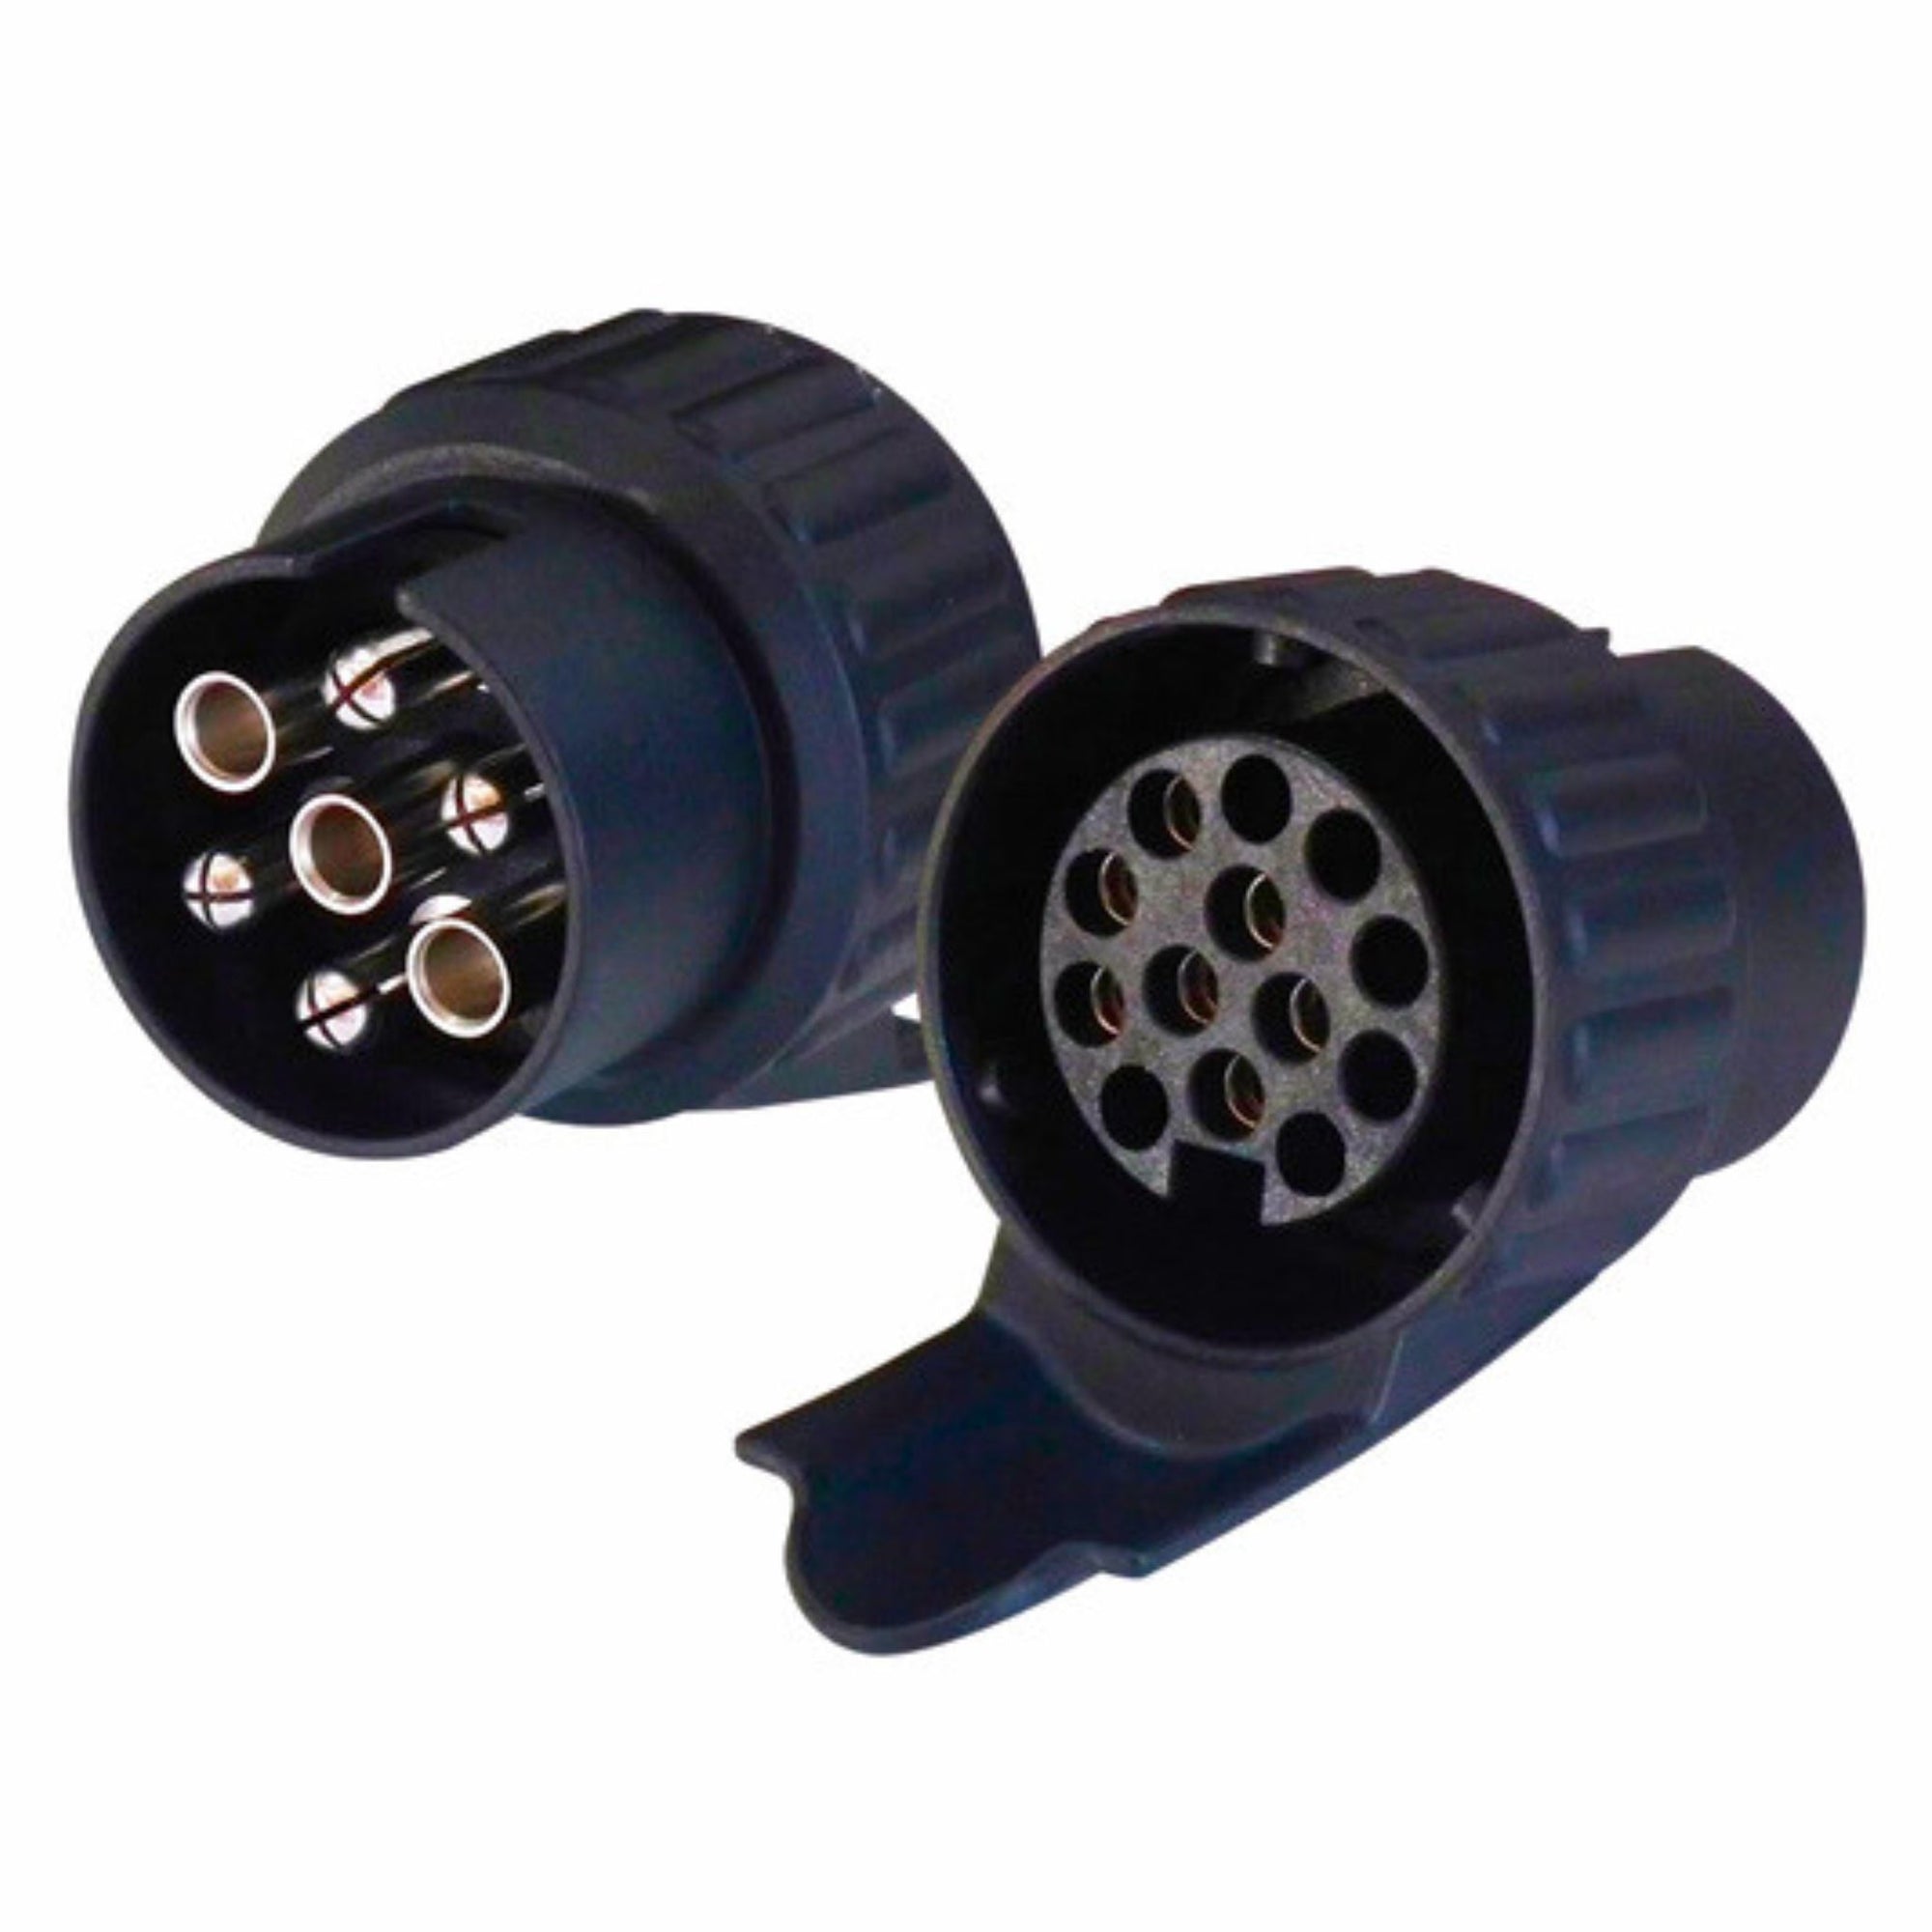 Trailer Connector Adaptor | 7 Pin plug to 13 Pin Socket | Micro Adaptor / Connector Plug | TC68 - South East Clearance Centre